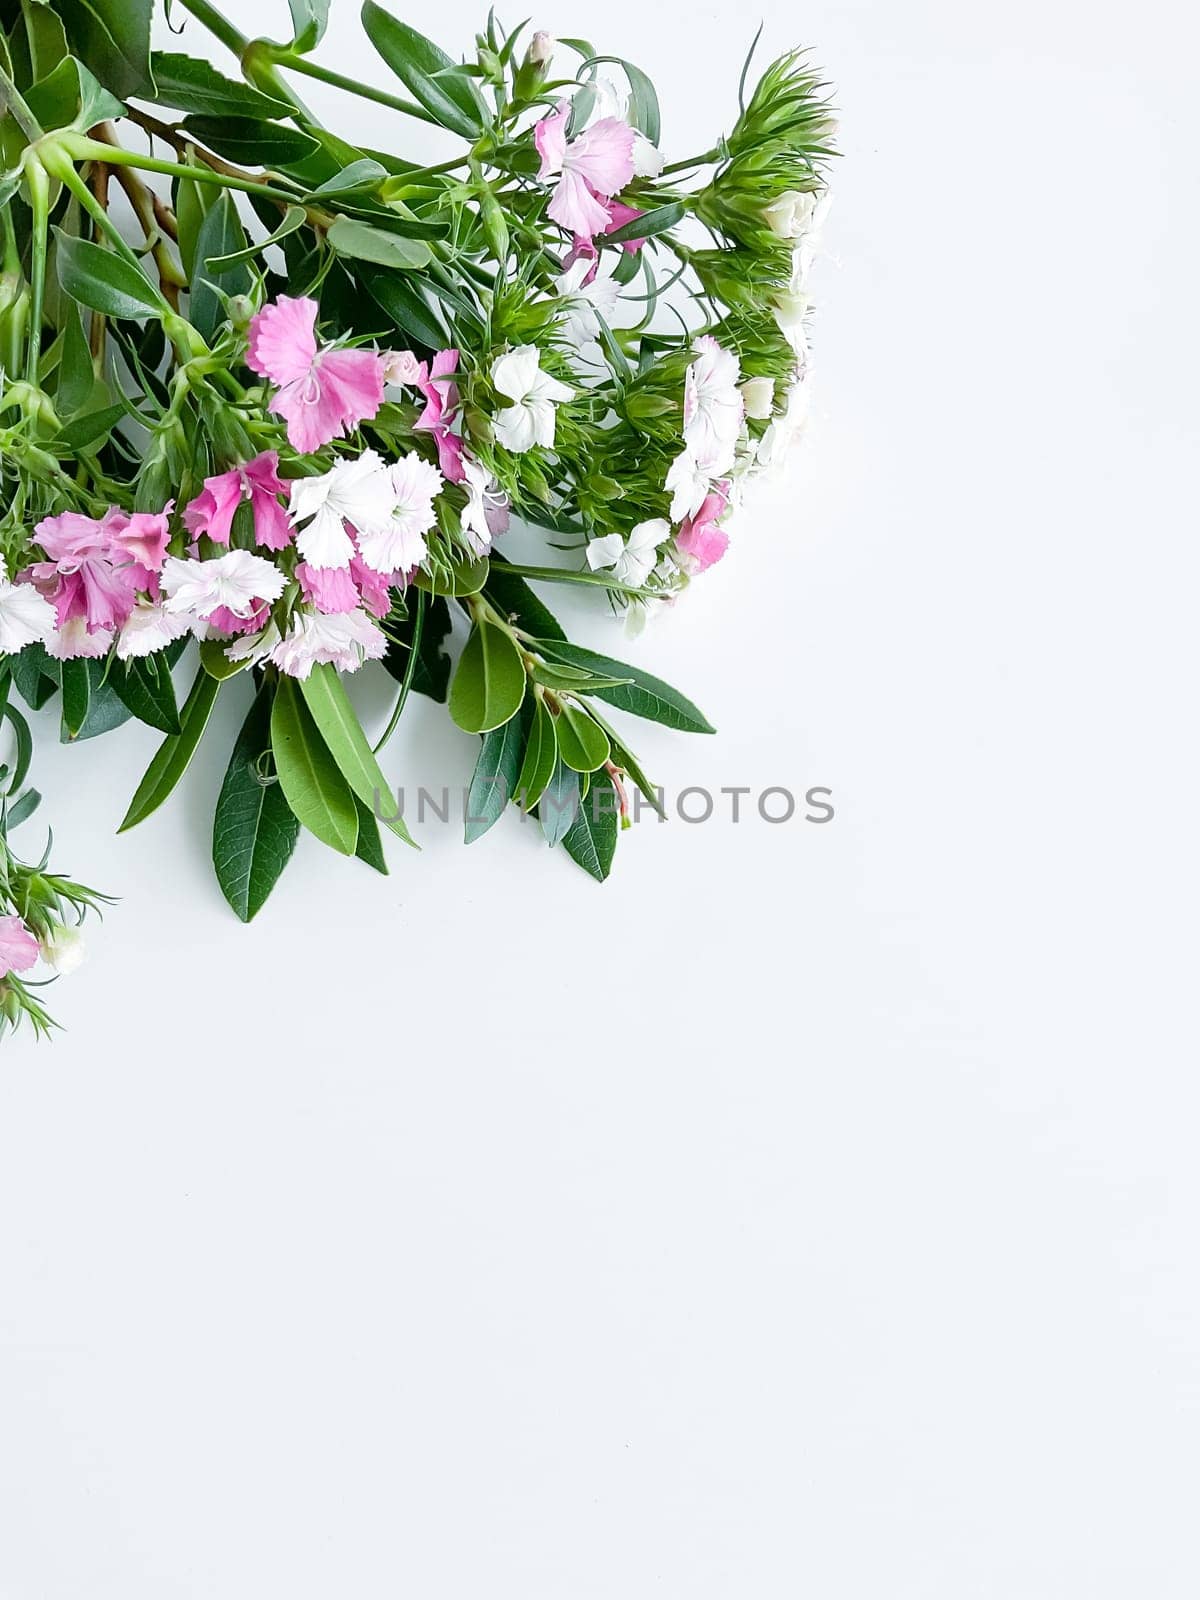 japanese dianthus and laurel leaves. floral frame by Lunnica